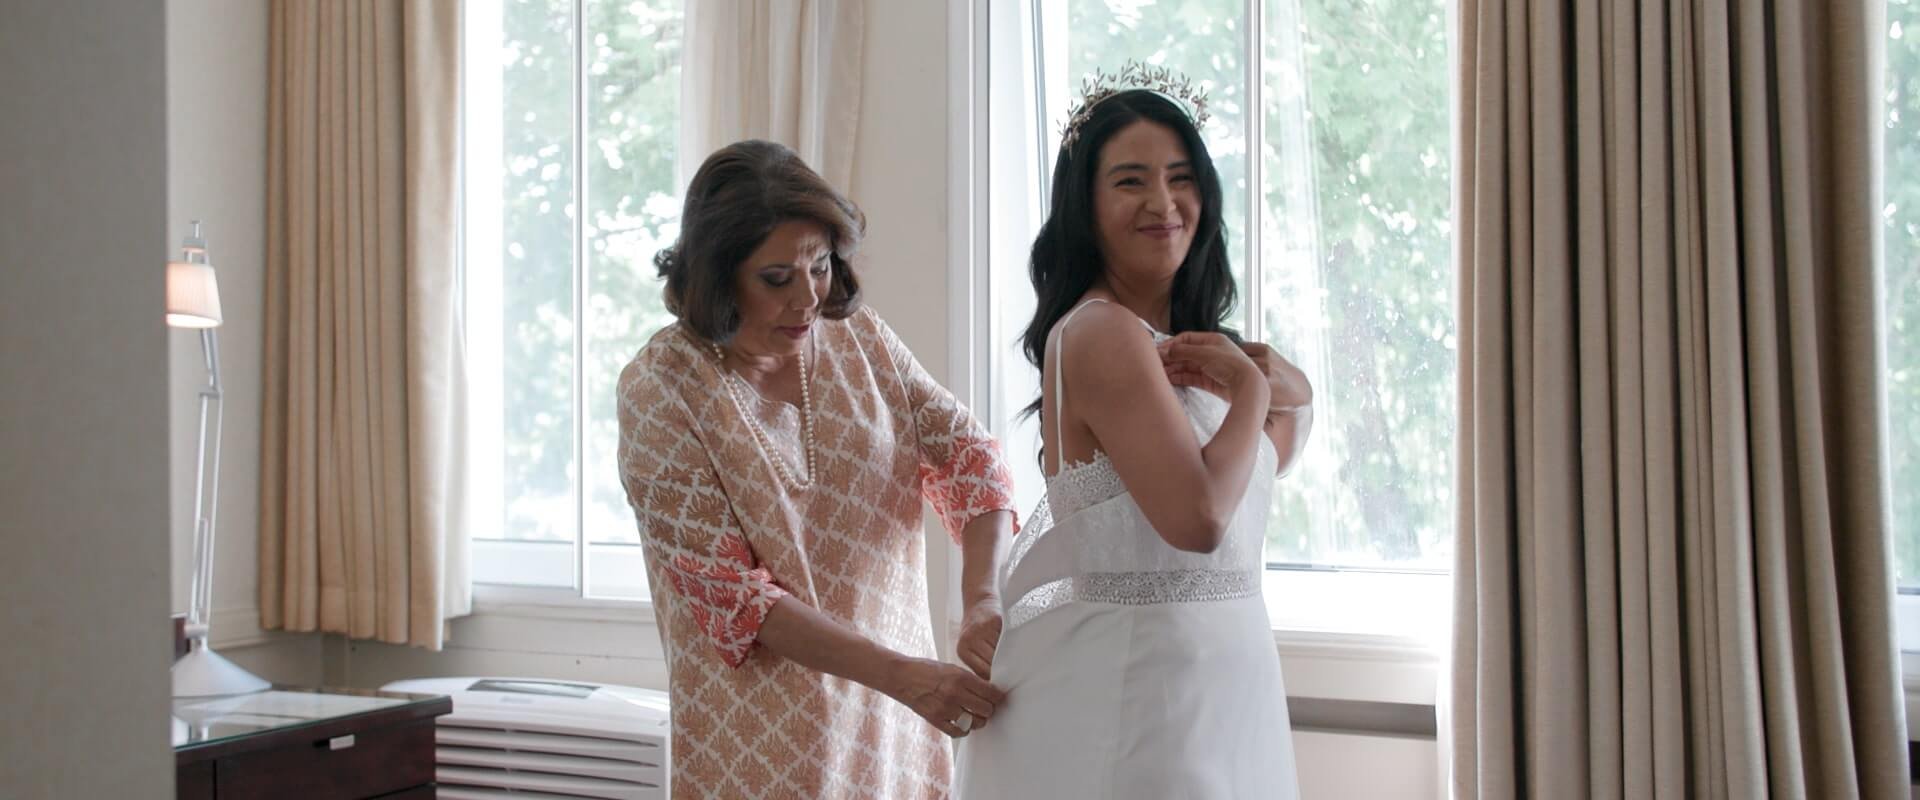 Ritas mother buttons up Rita's wedding dress on the morning of her wedding